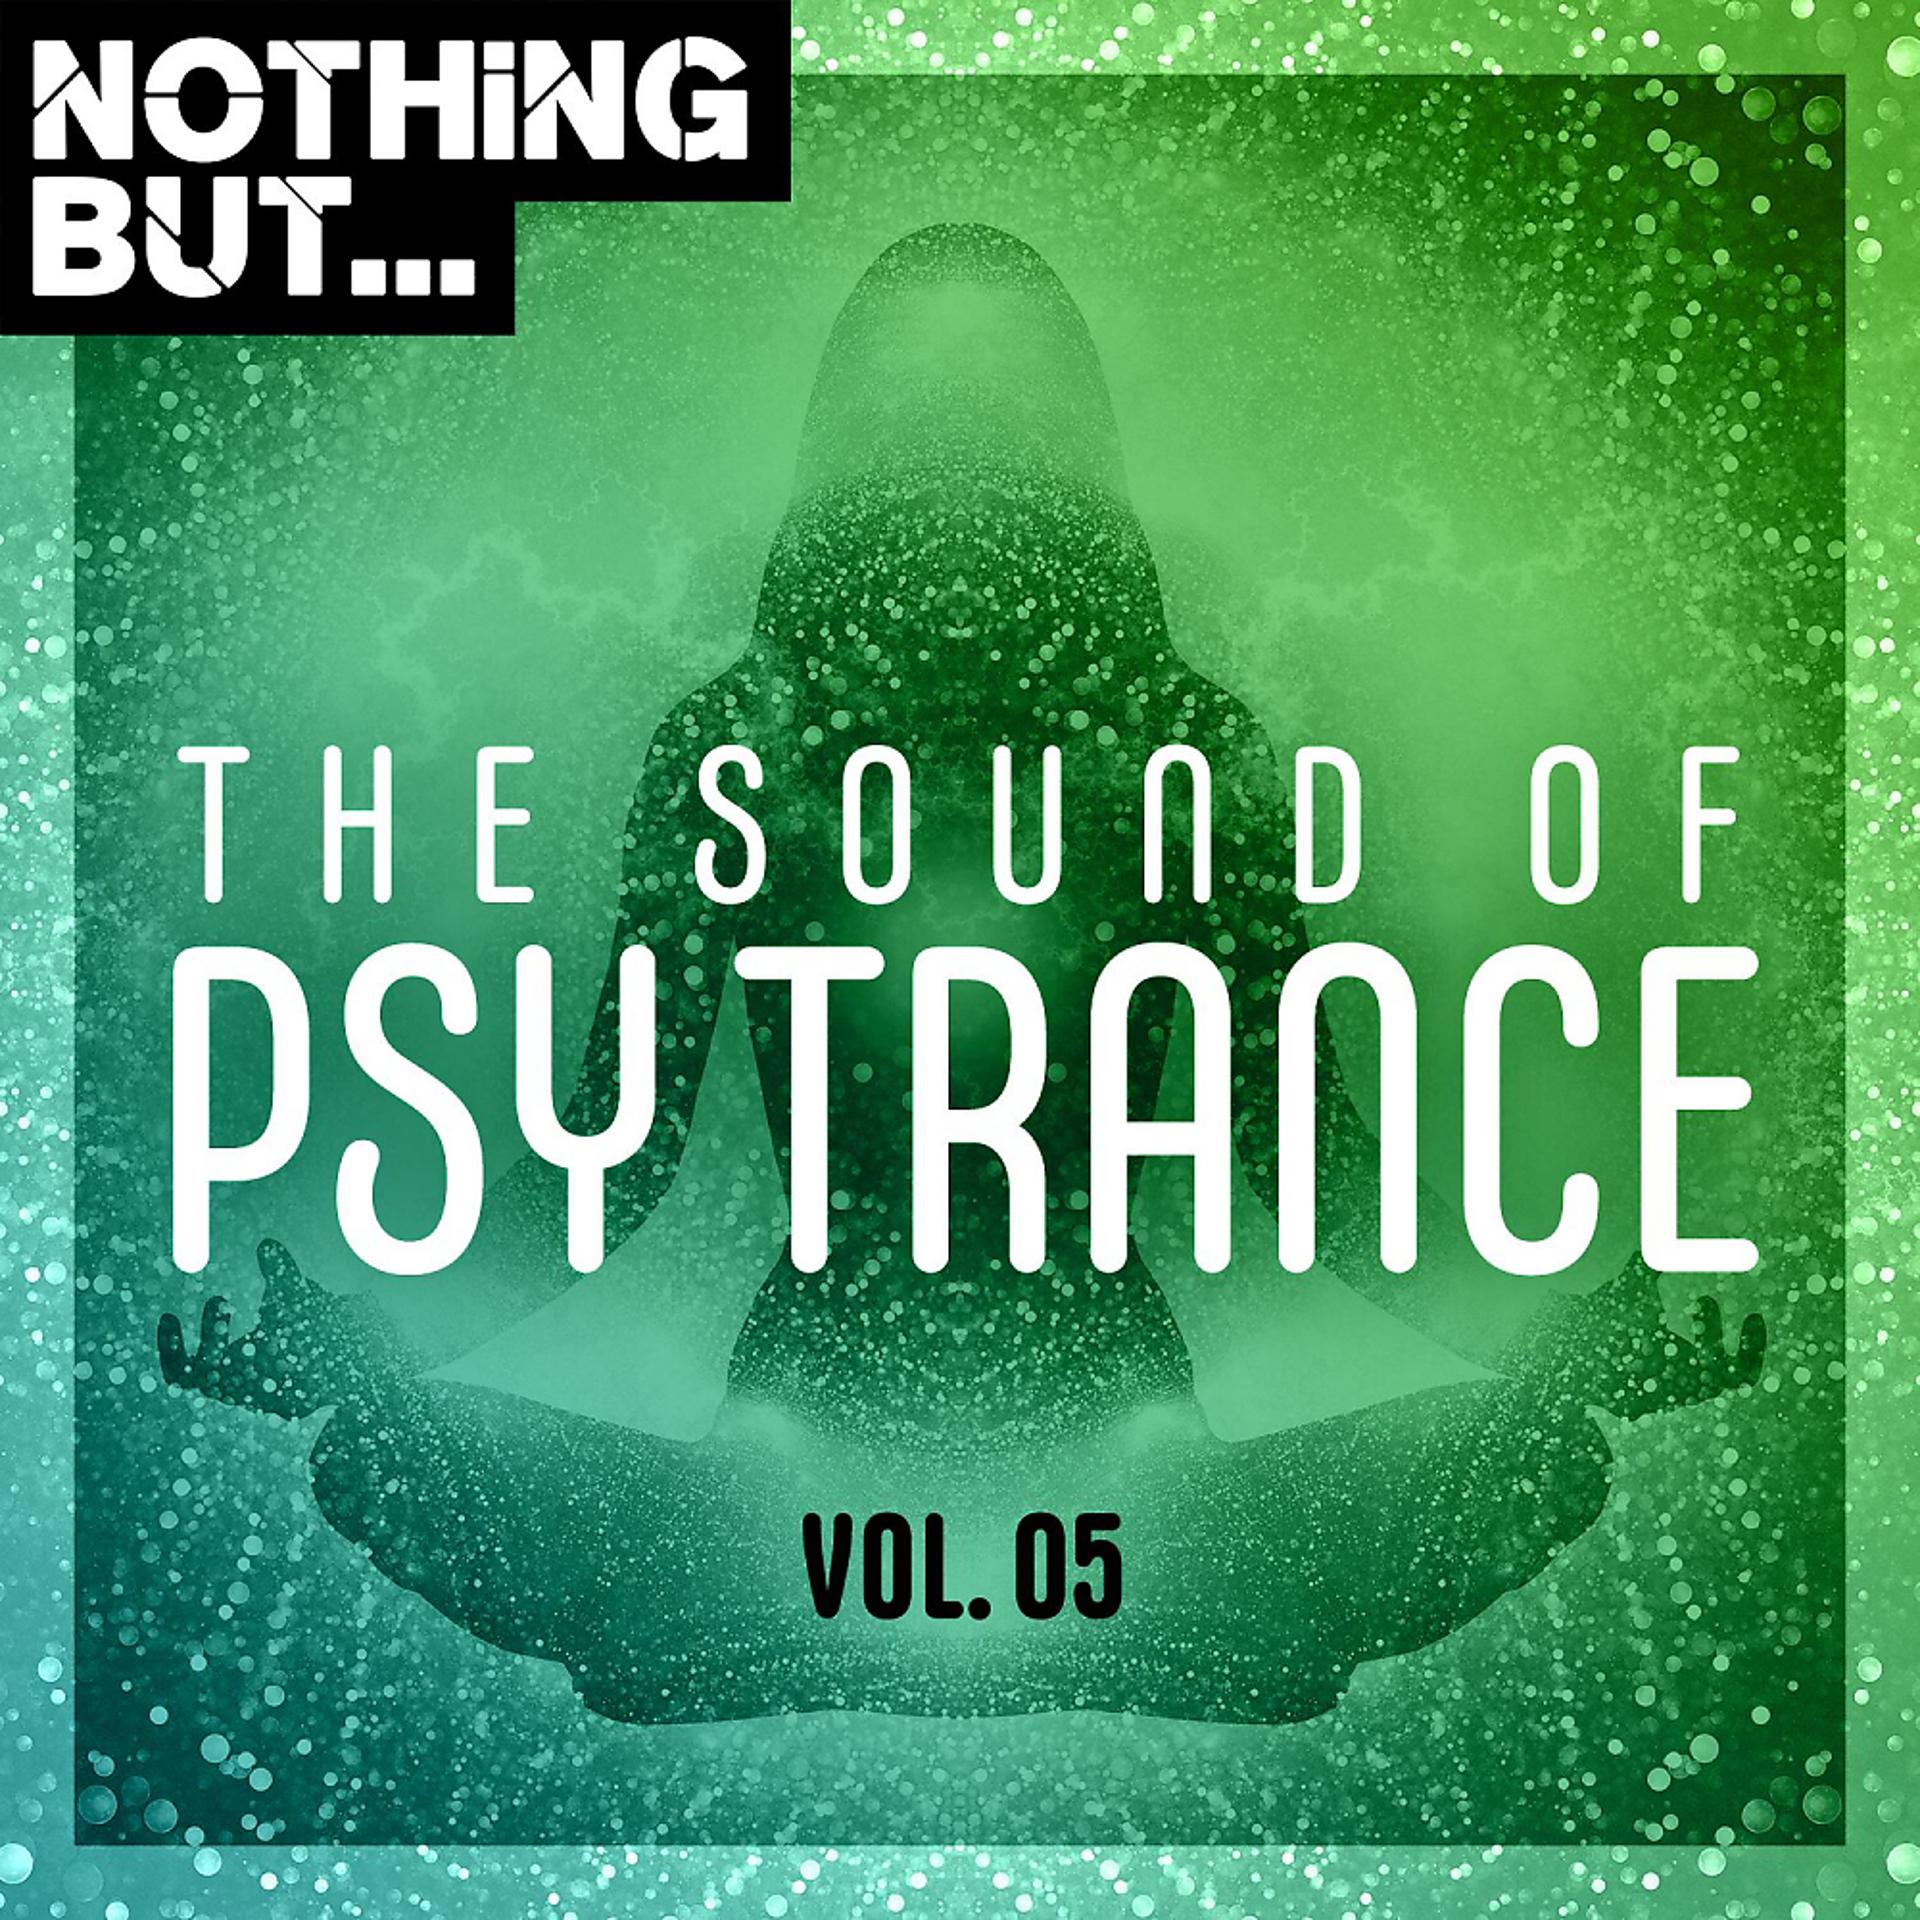 Постер альбома Nothing But... The Sound of Psy Trance, Vol. 05